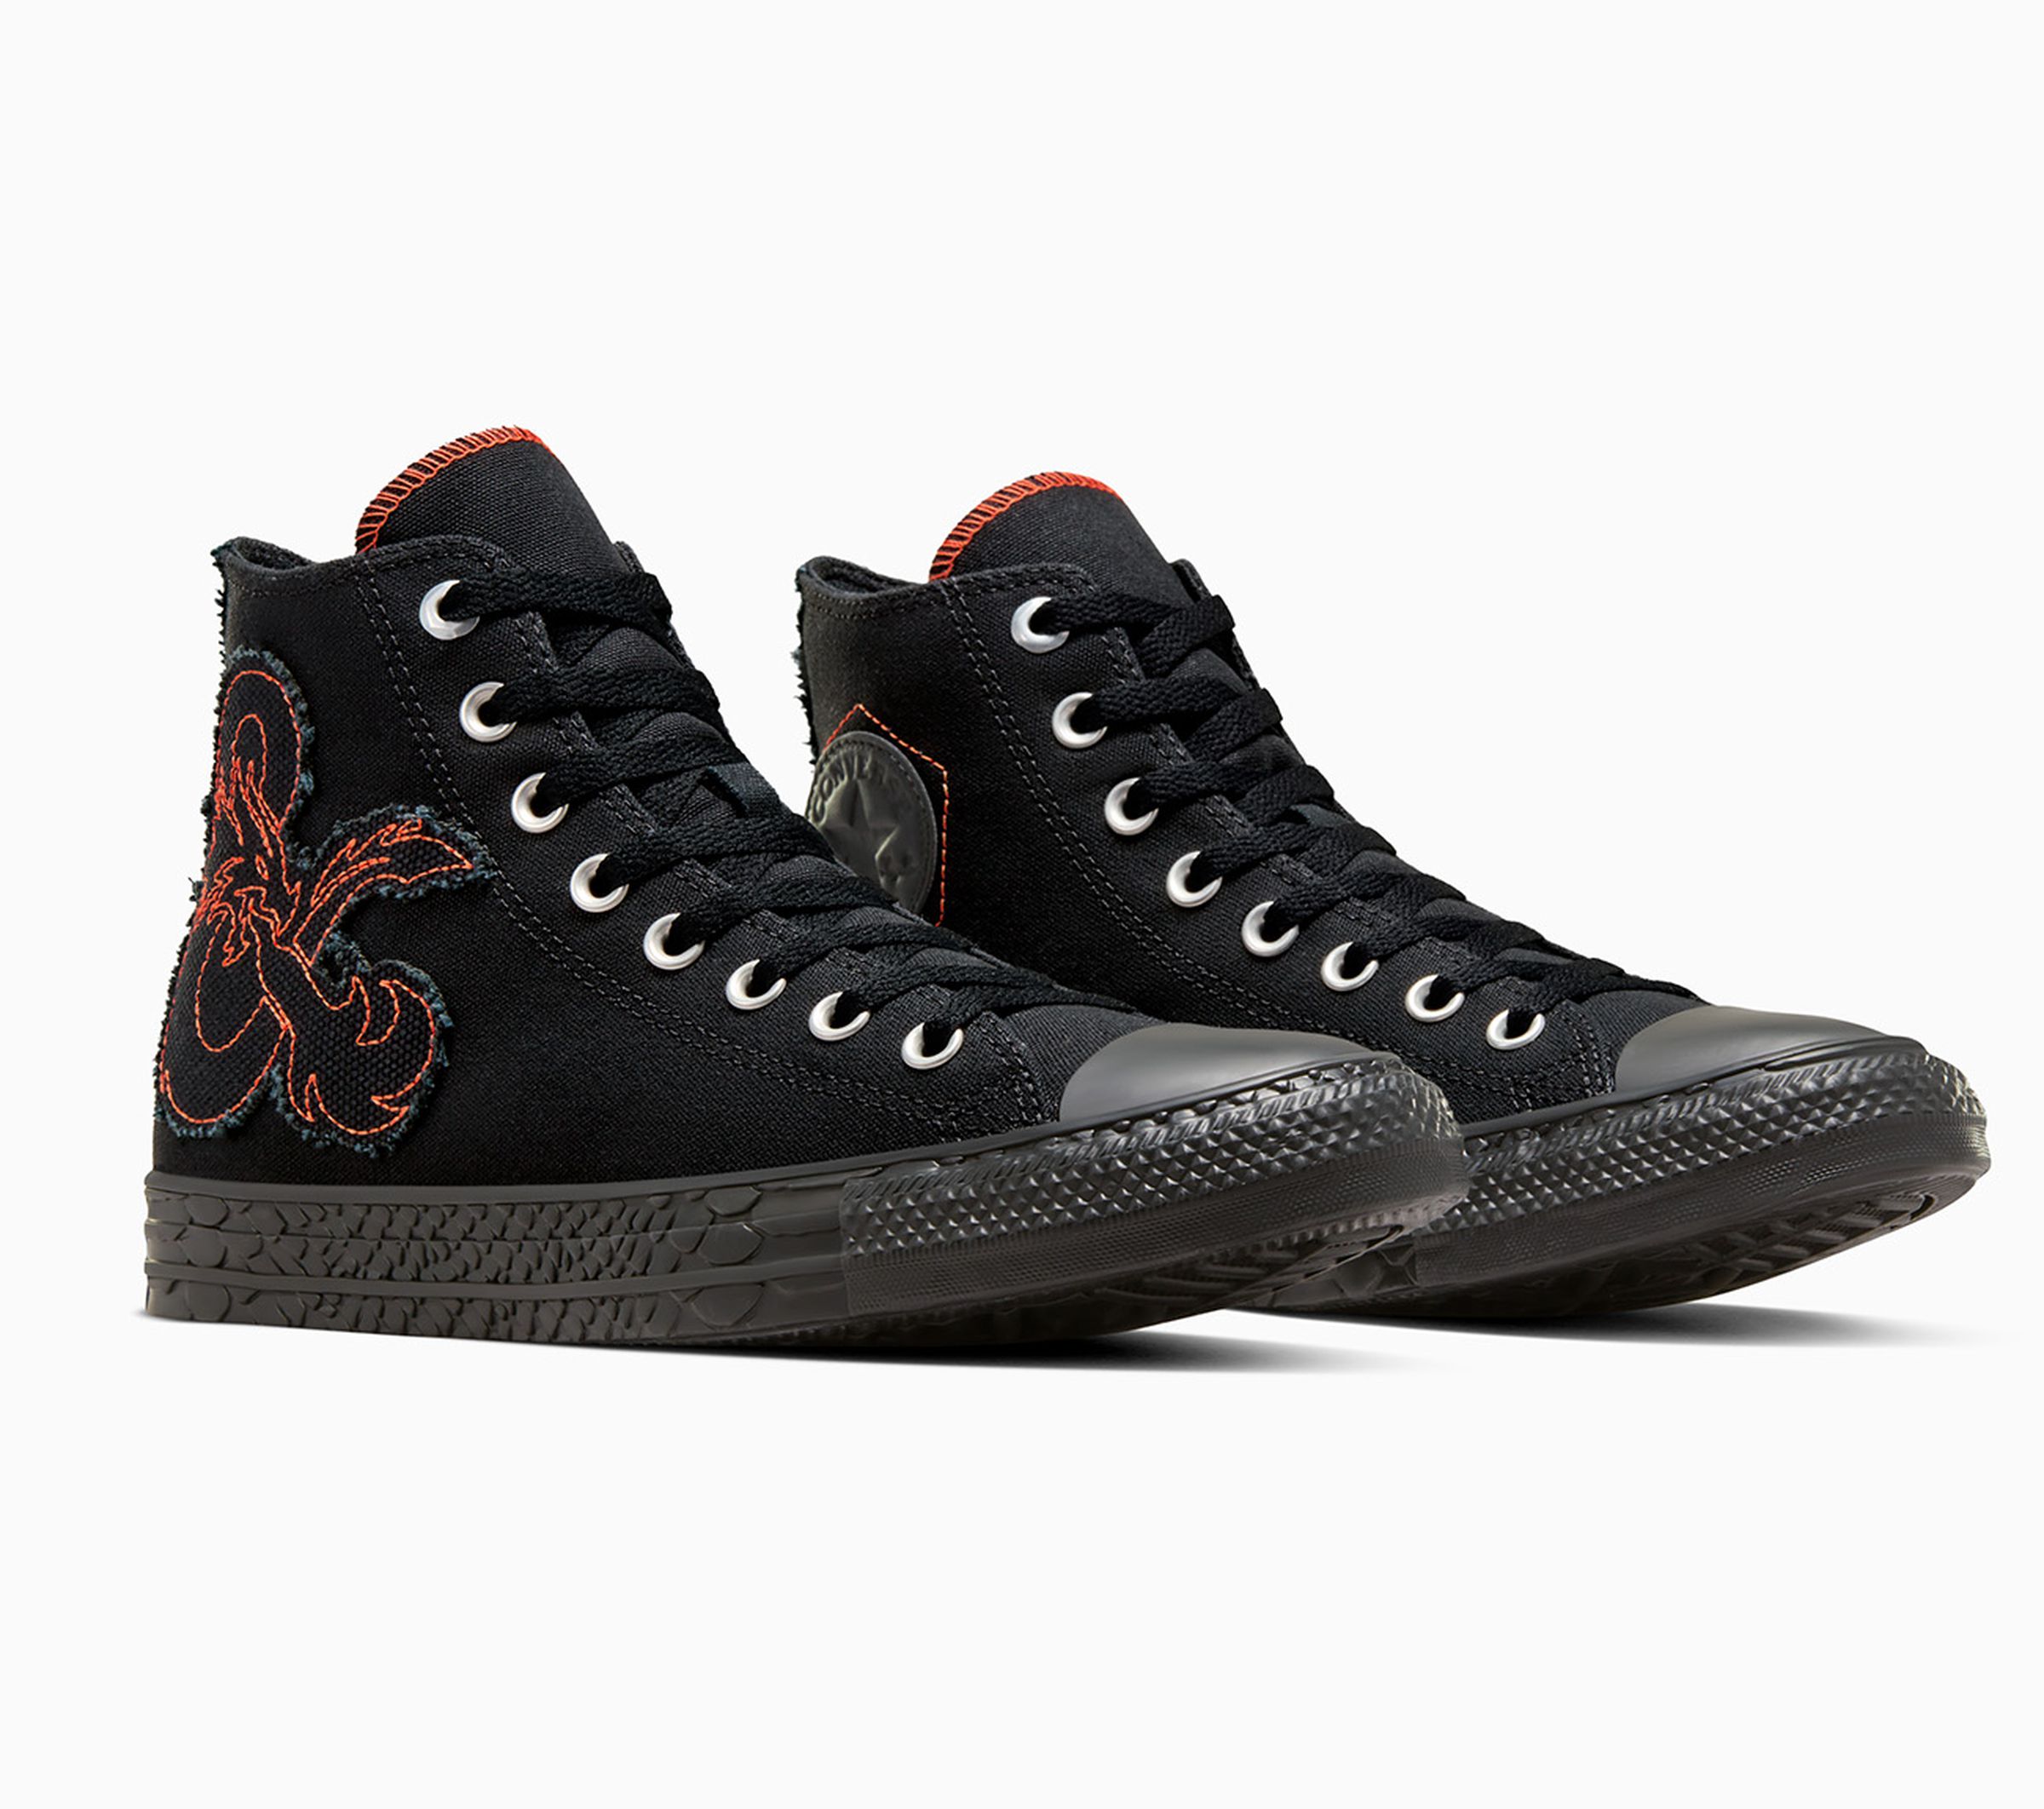 D&amp;D-themed Converse in black and red.